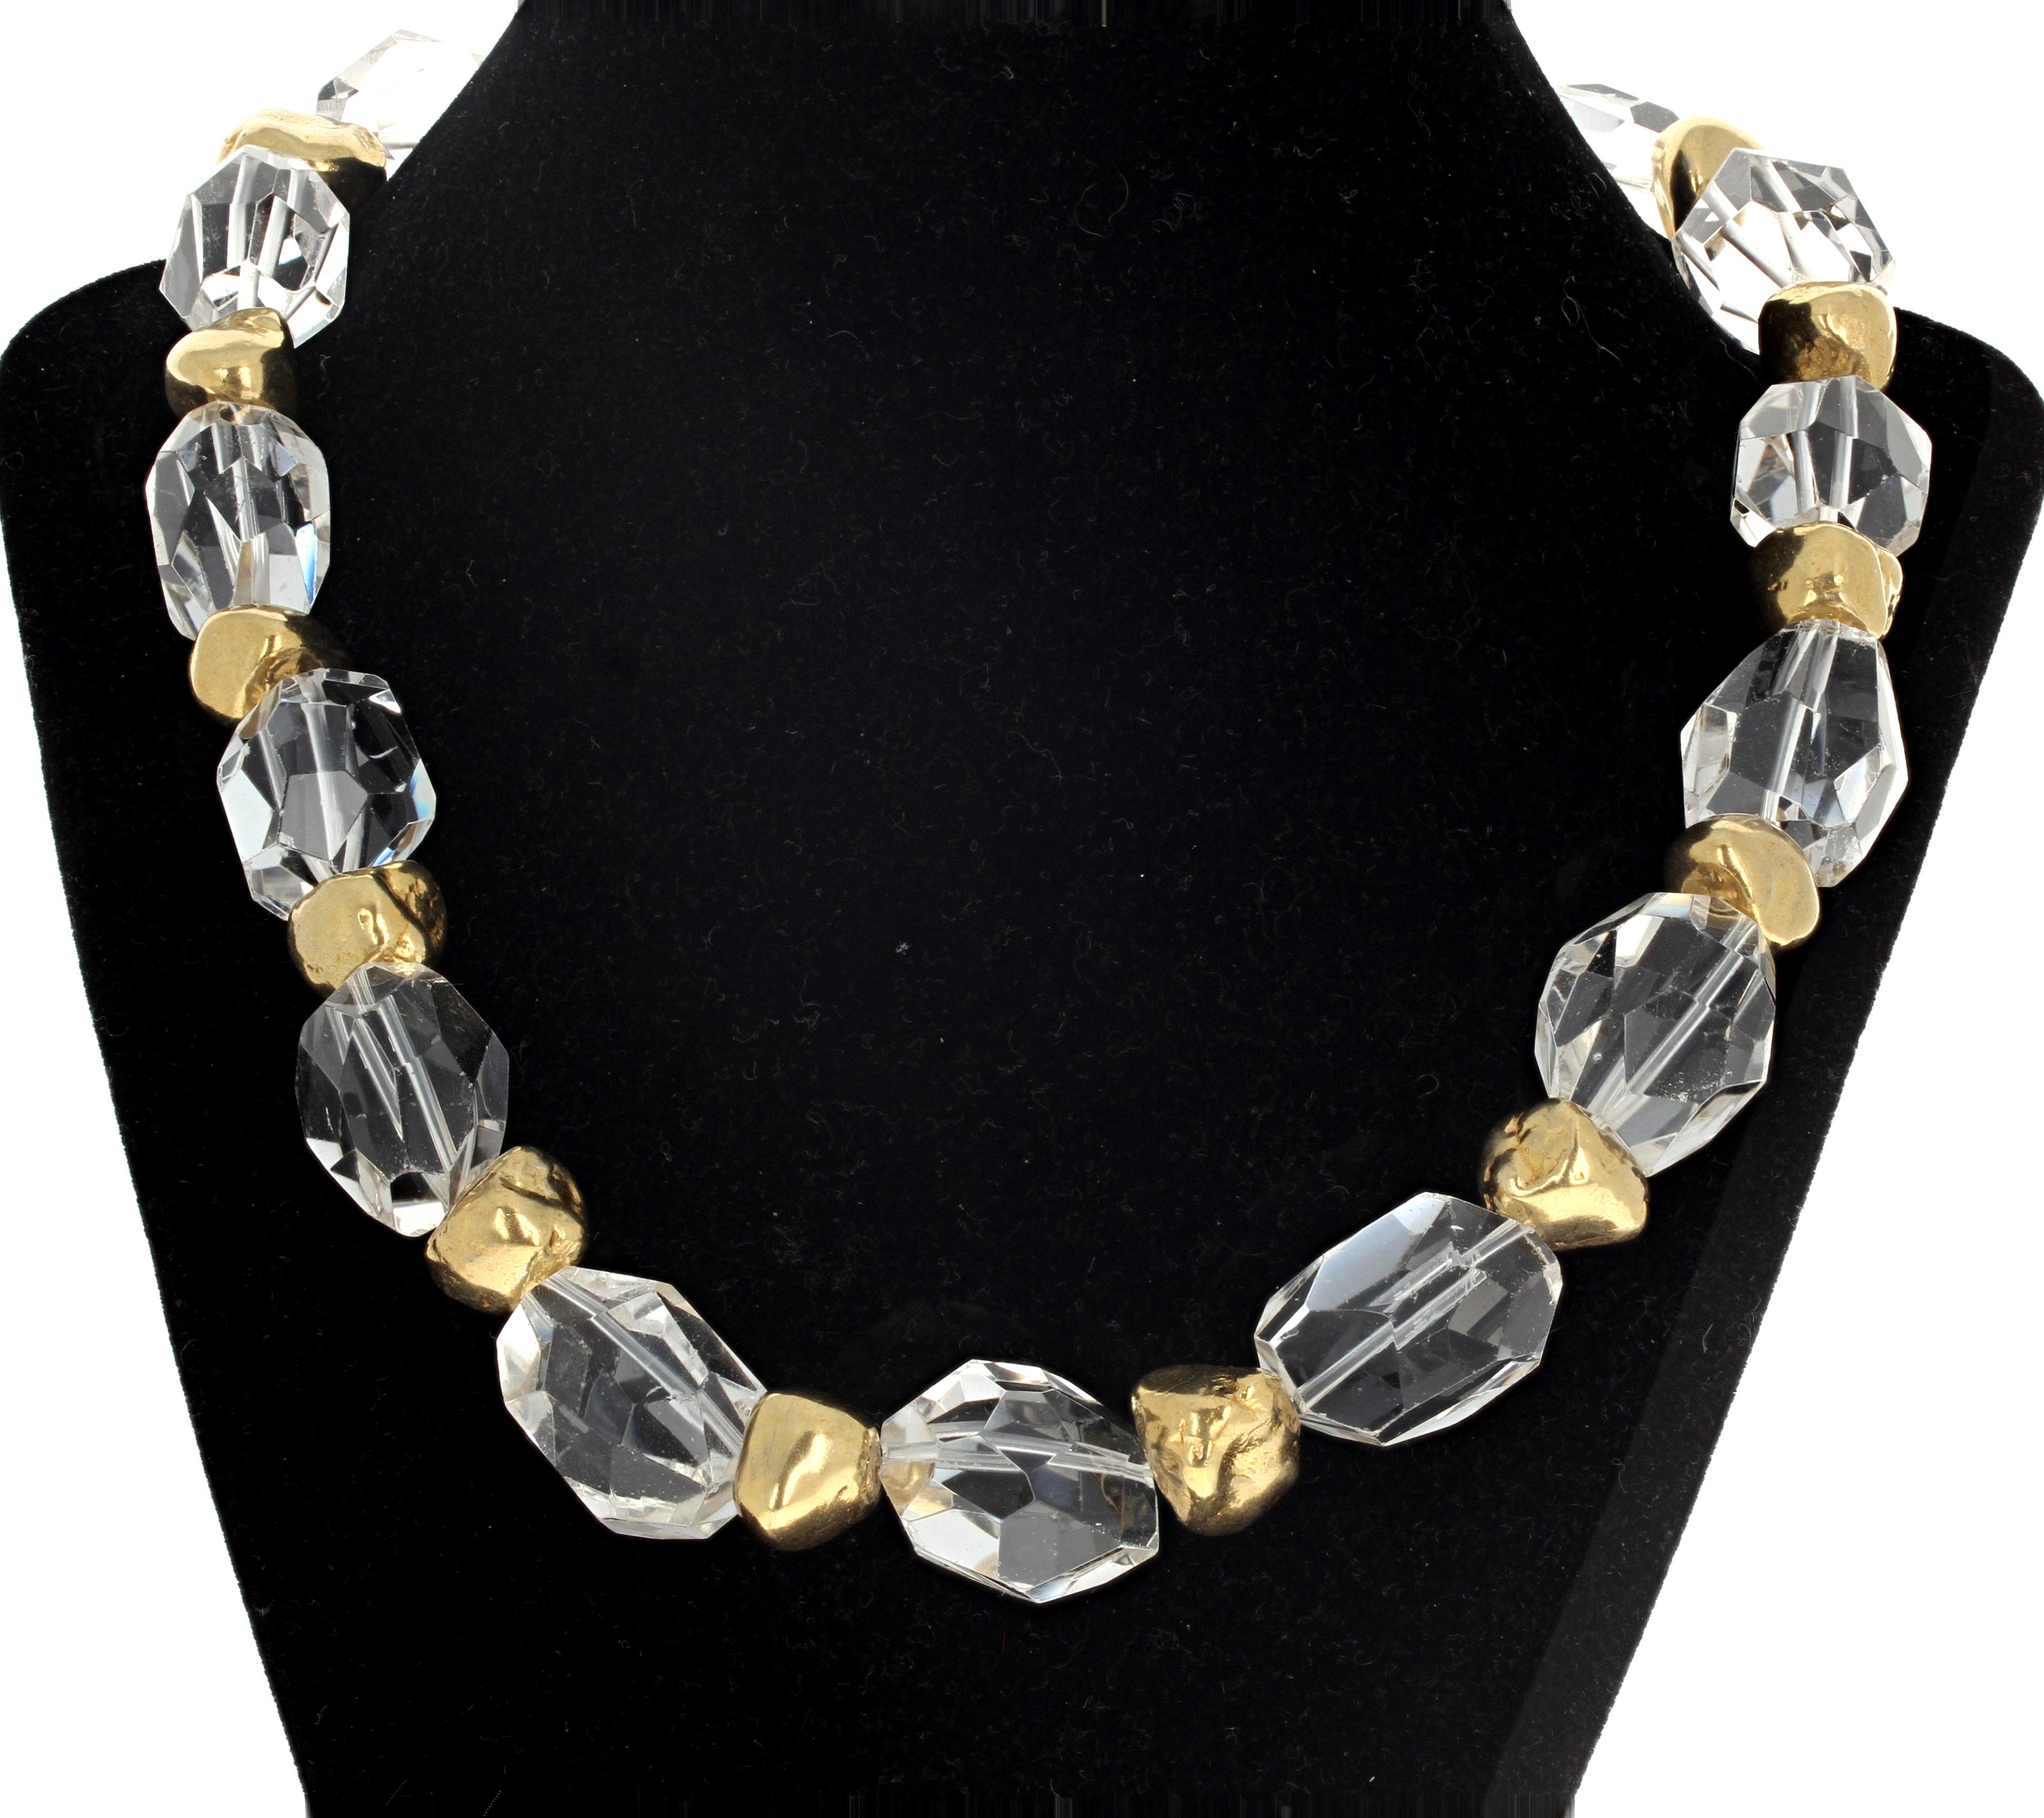 Glitteringly brilliant natural translucent real white Quartz (approximately 24mm x 18mm) enhanced by these highly polished real gold plated chunks is 19 inches long.  The gold plated clasp is an easy to use hook clasp.  This goes 